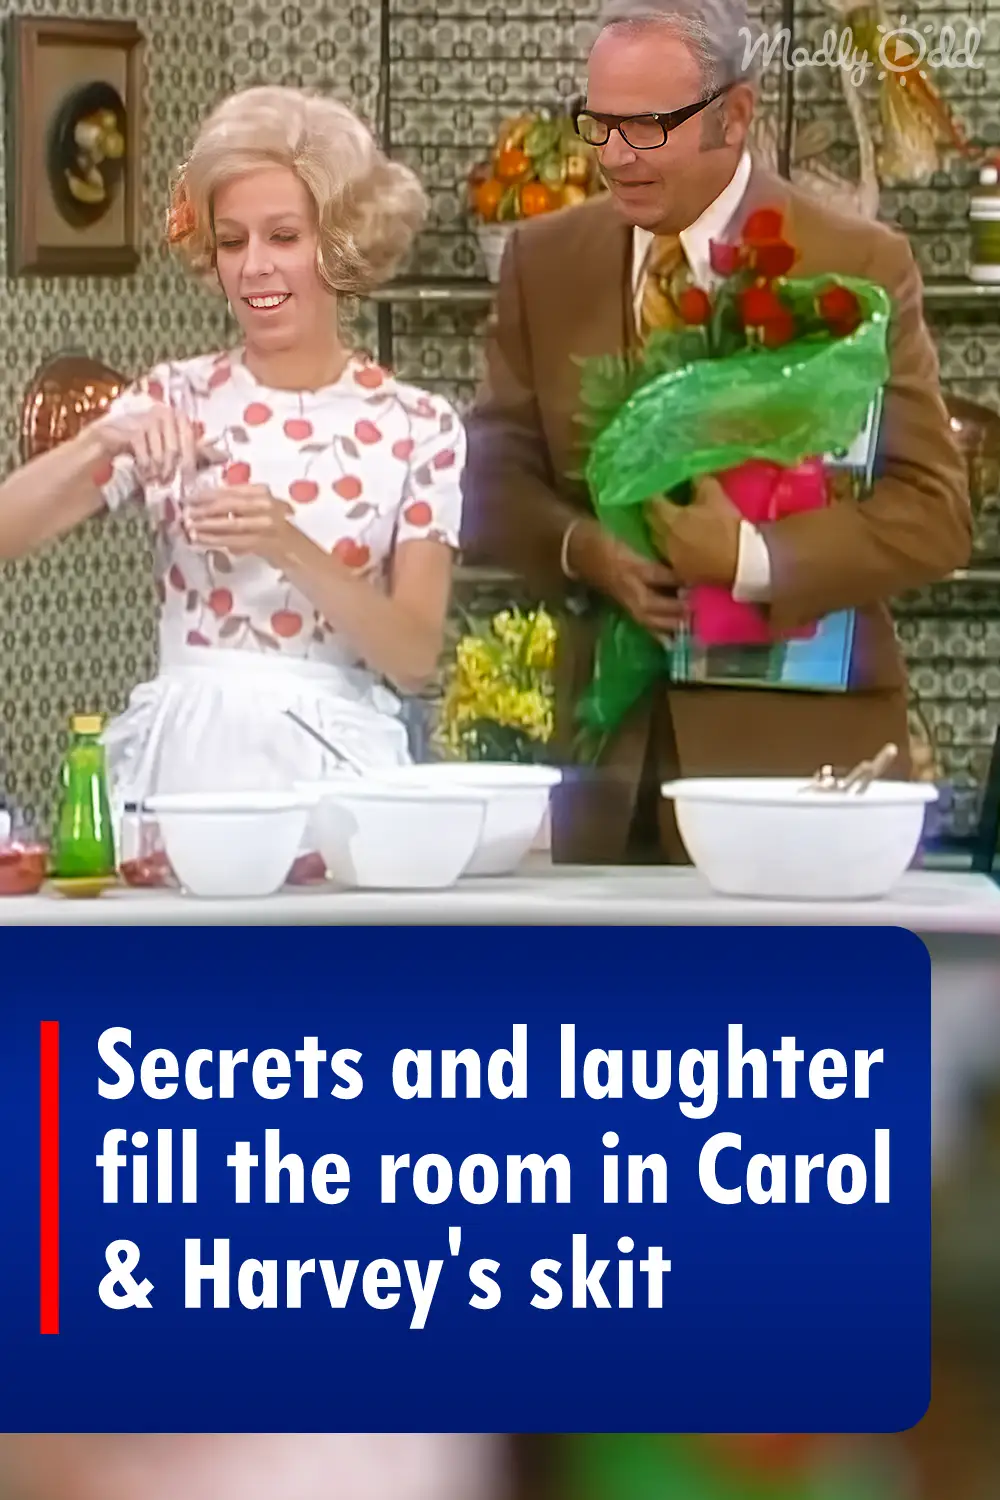 Secrets and laughter fill the room in Carol & Harvey's skit